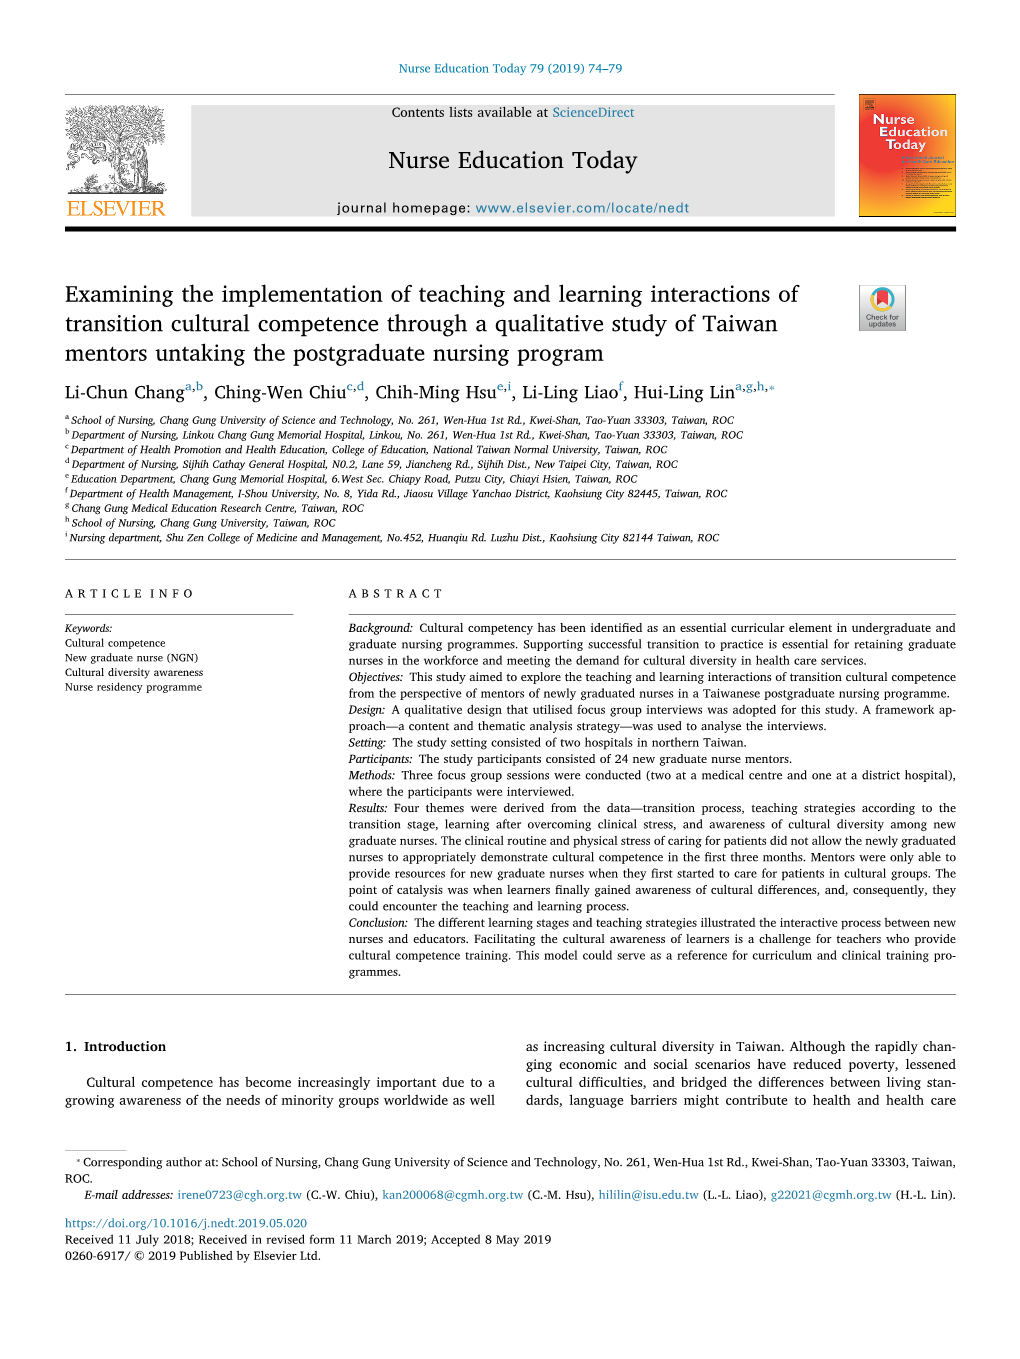 Examining the Implementation of Teaching and Learning Interactions